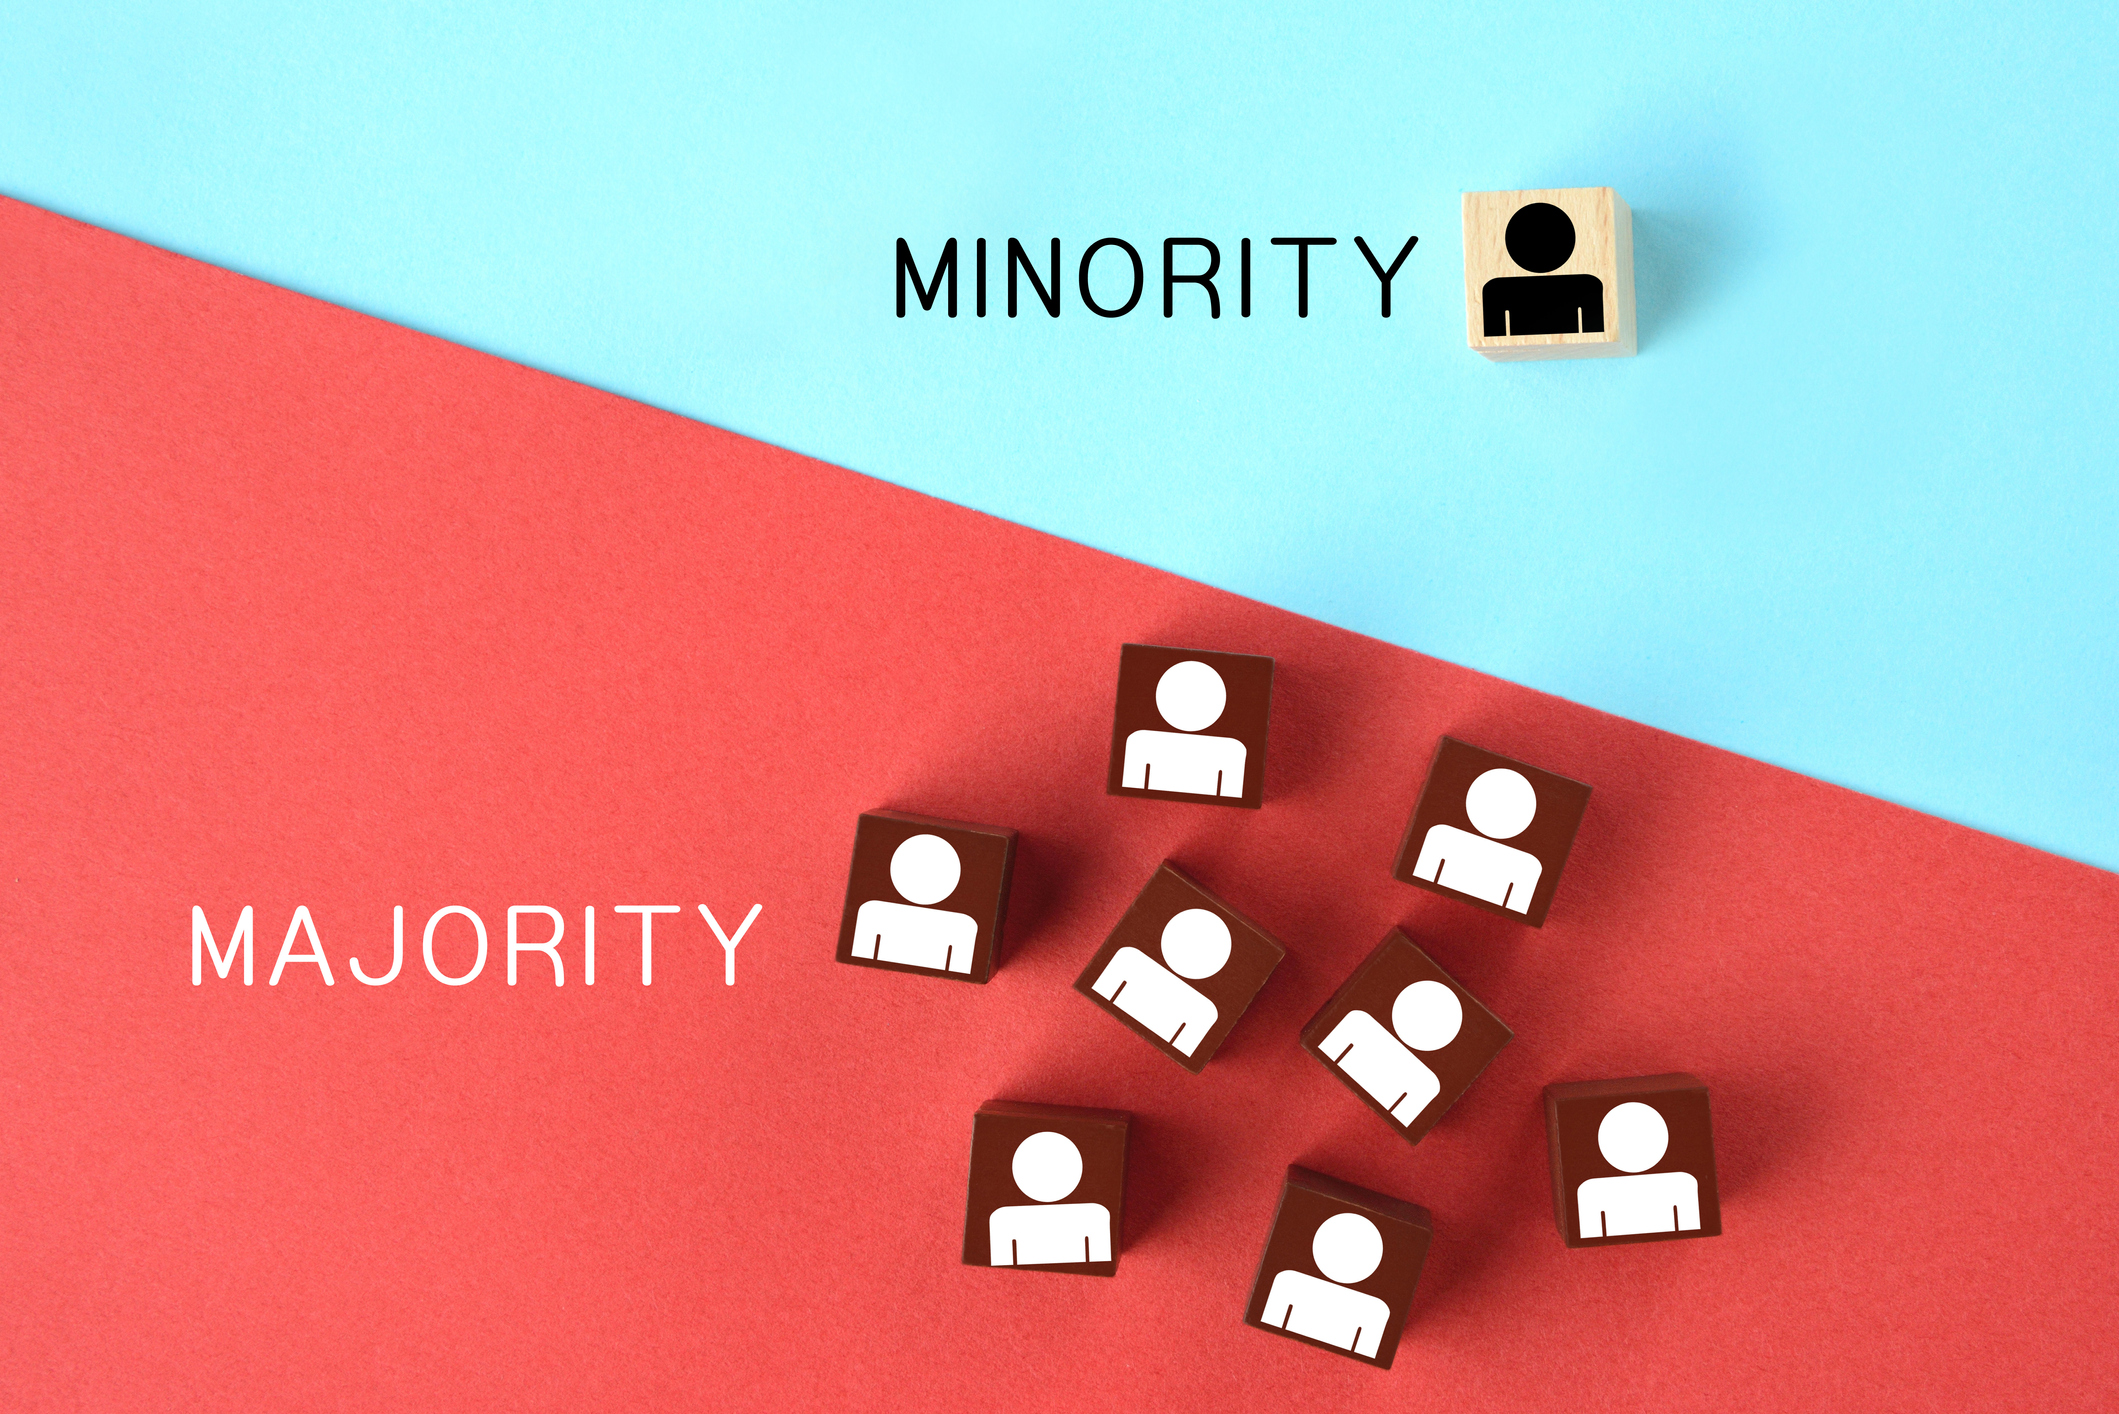 minority-and-majority-images-1249720280_2122x1416